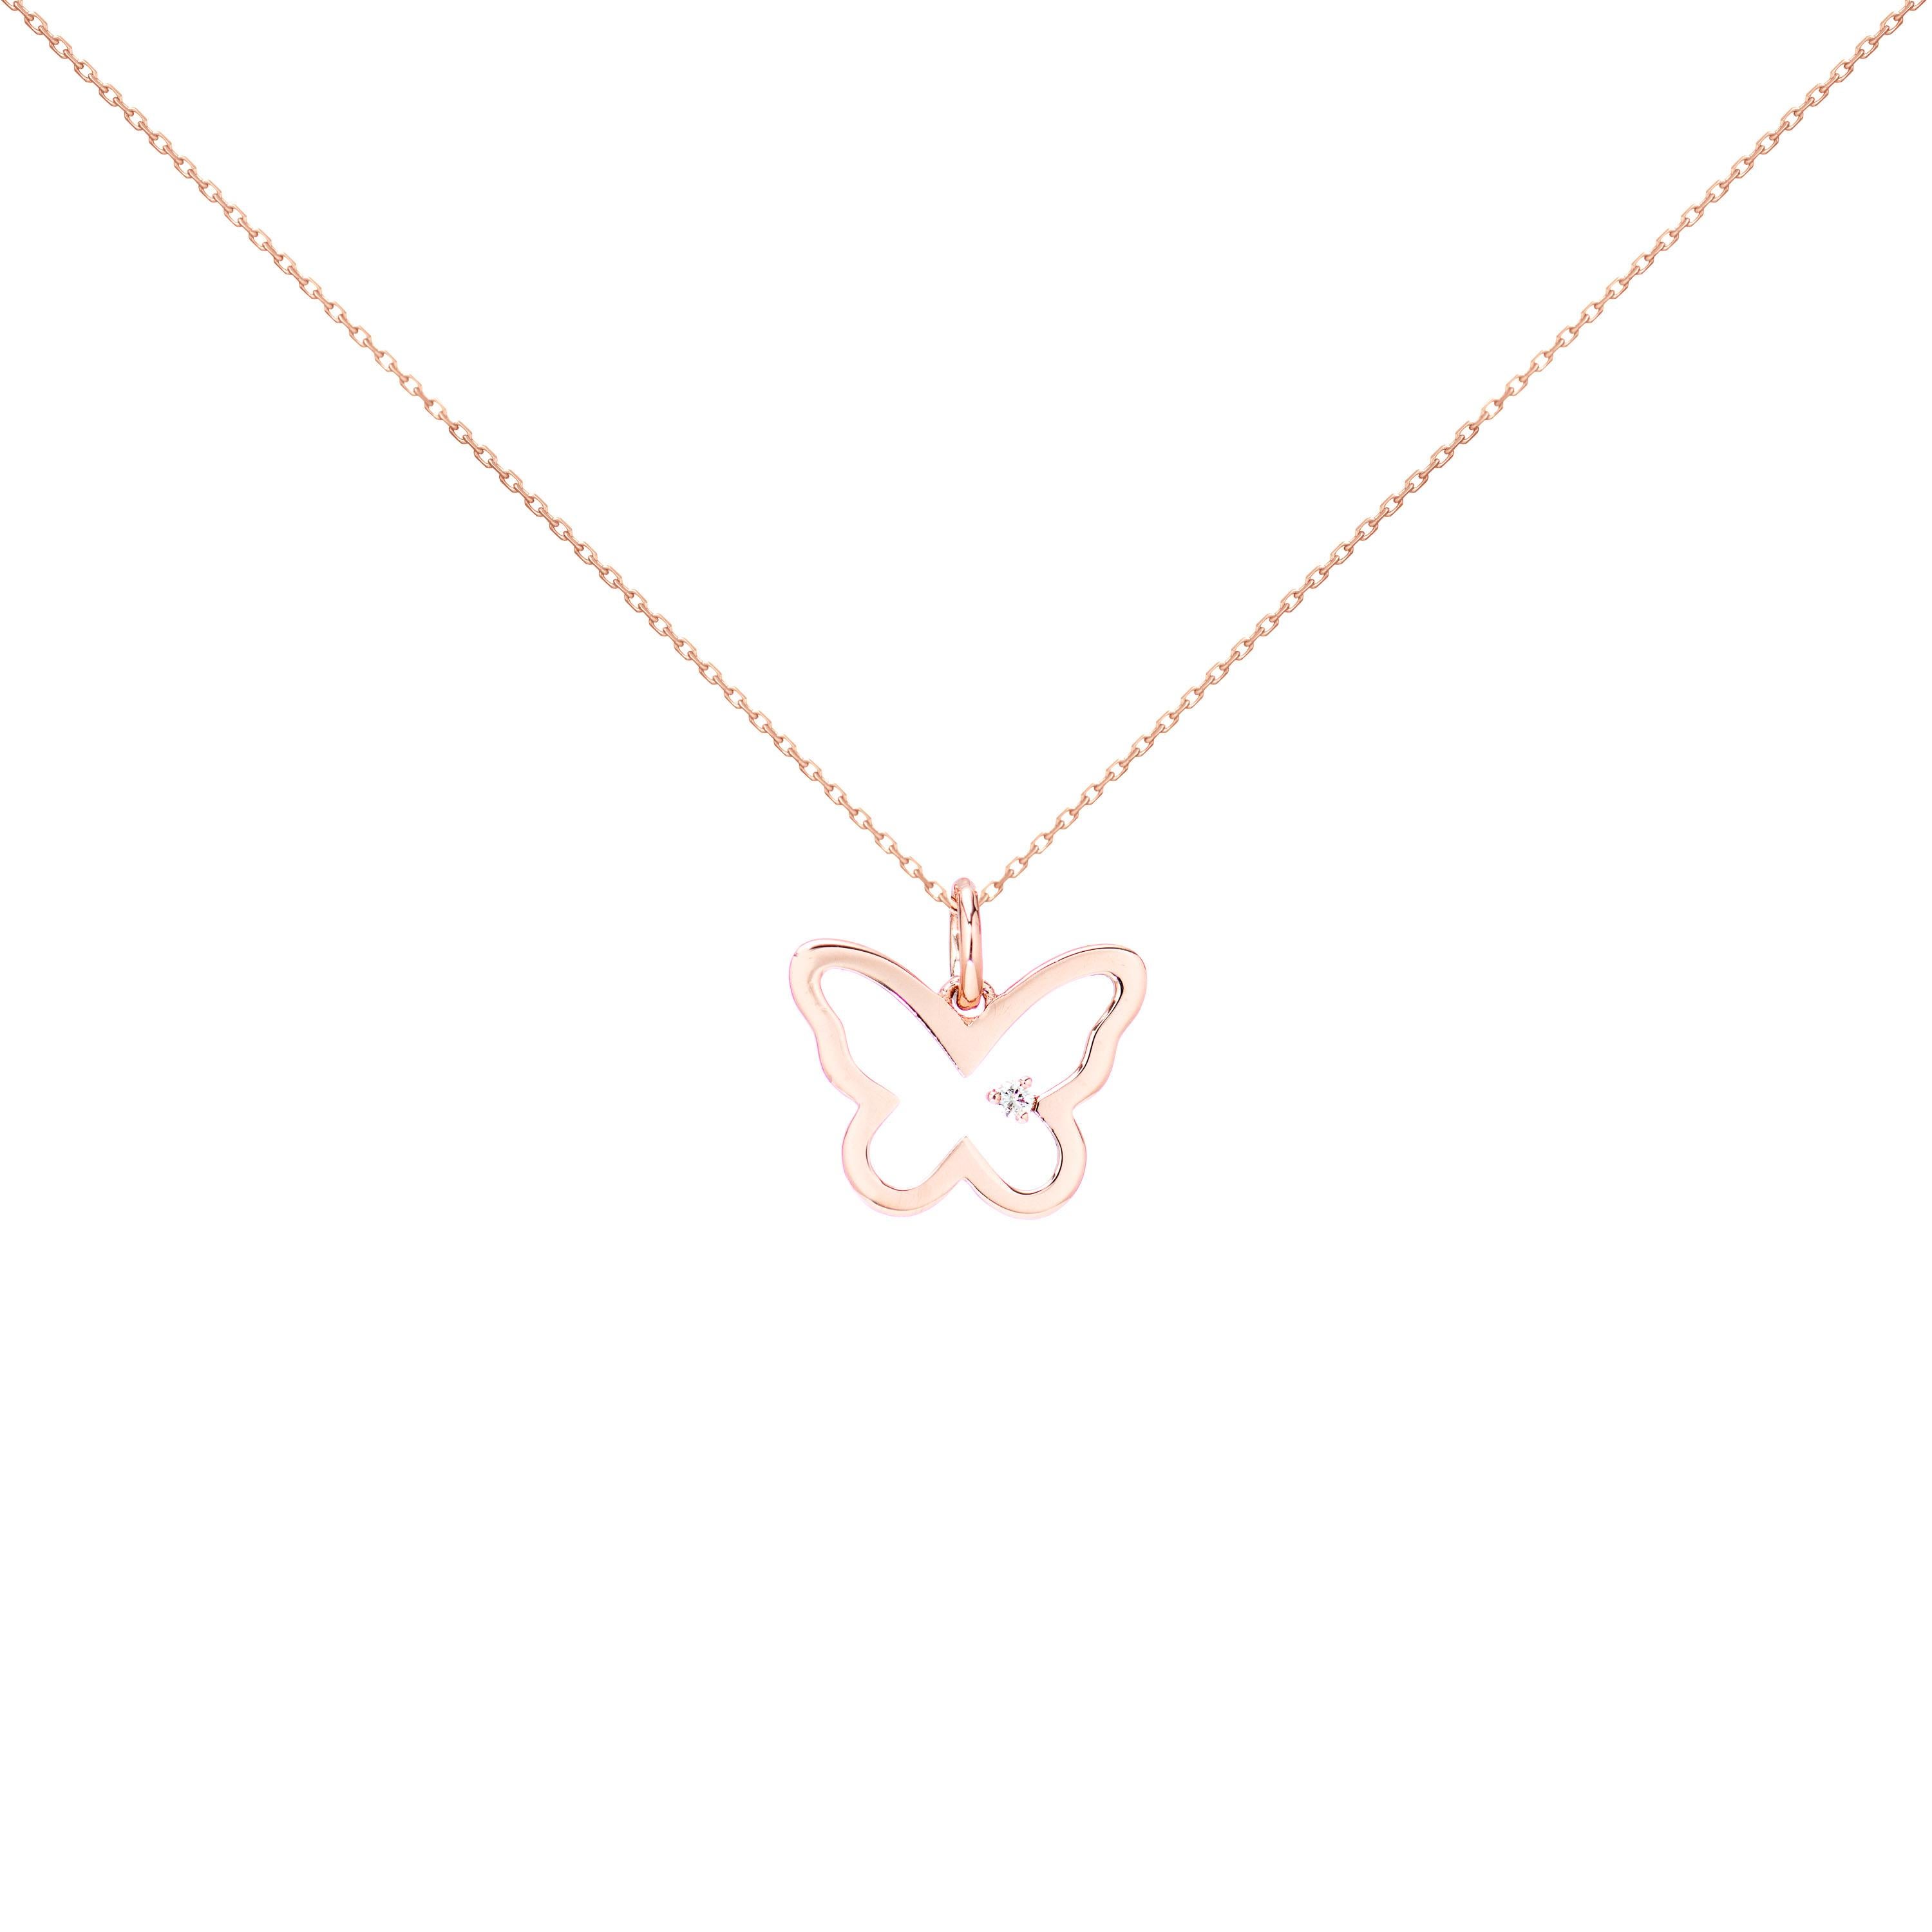 AS29
14kt rose gold diamond Butterfly necklace
Your wings already exist, all you have to do is fly. Boasting a 14kt rose gold construction and adorned with a diamond, this Butterfly necklace from AS29 can give you a little help. Fly